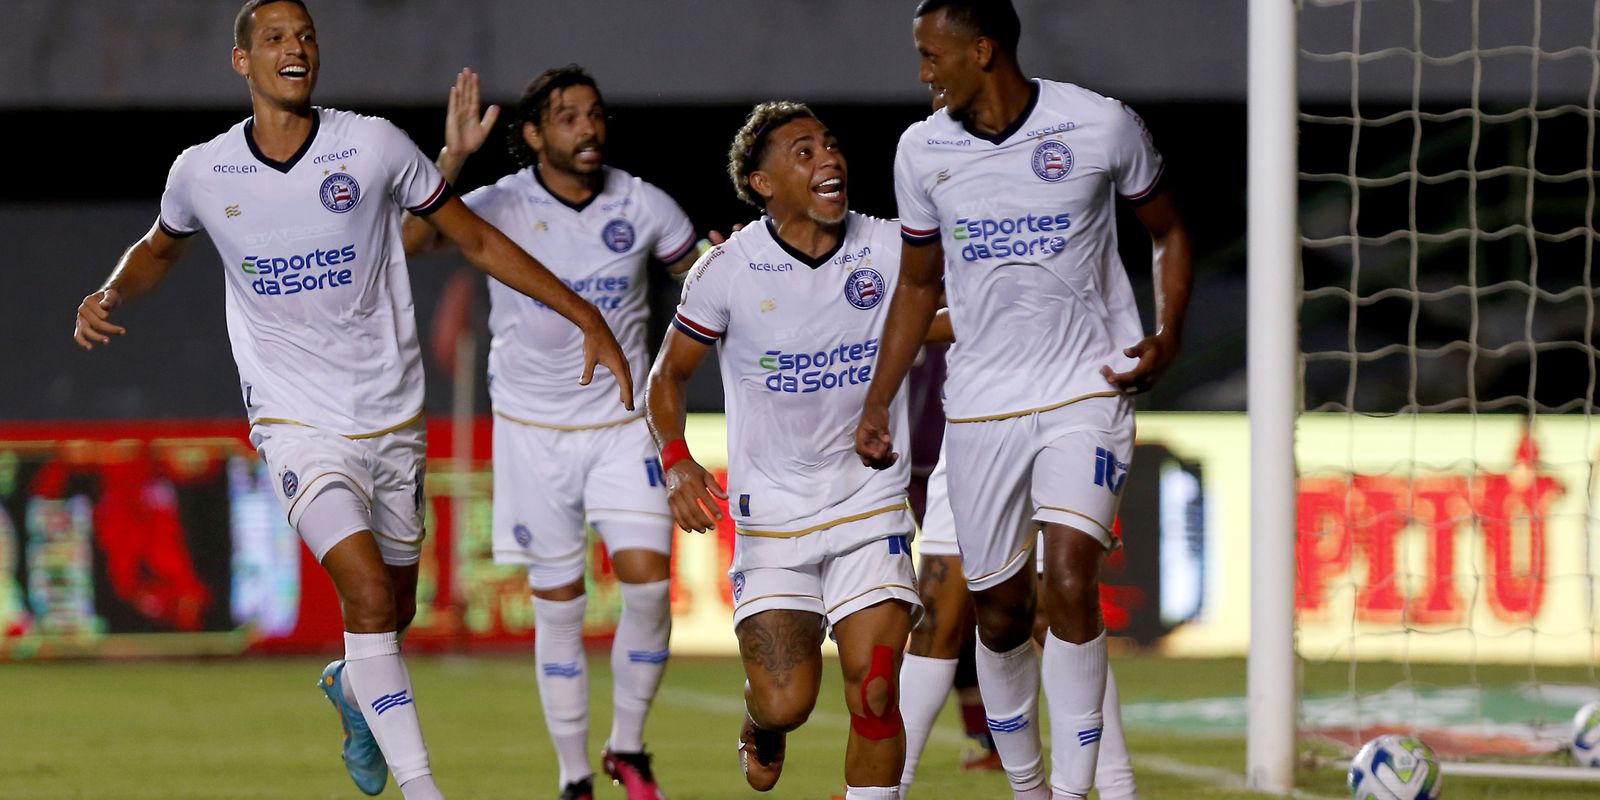 Copa do Brasil: Bahia qualifies with a rout over Jacuipense